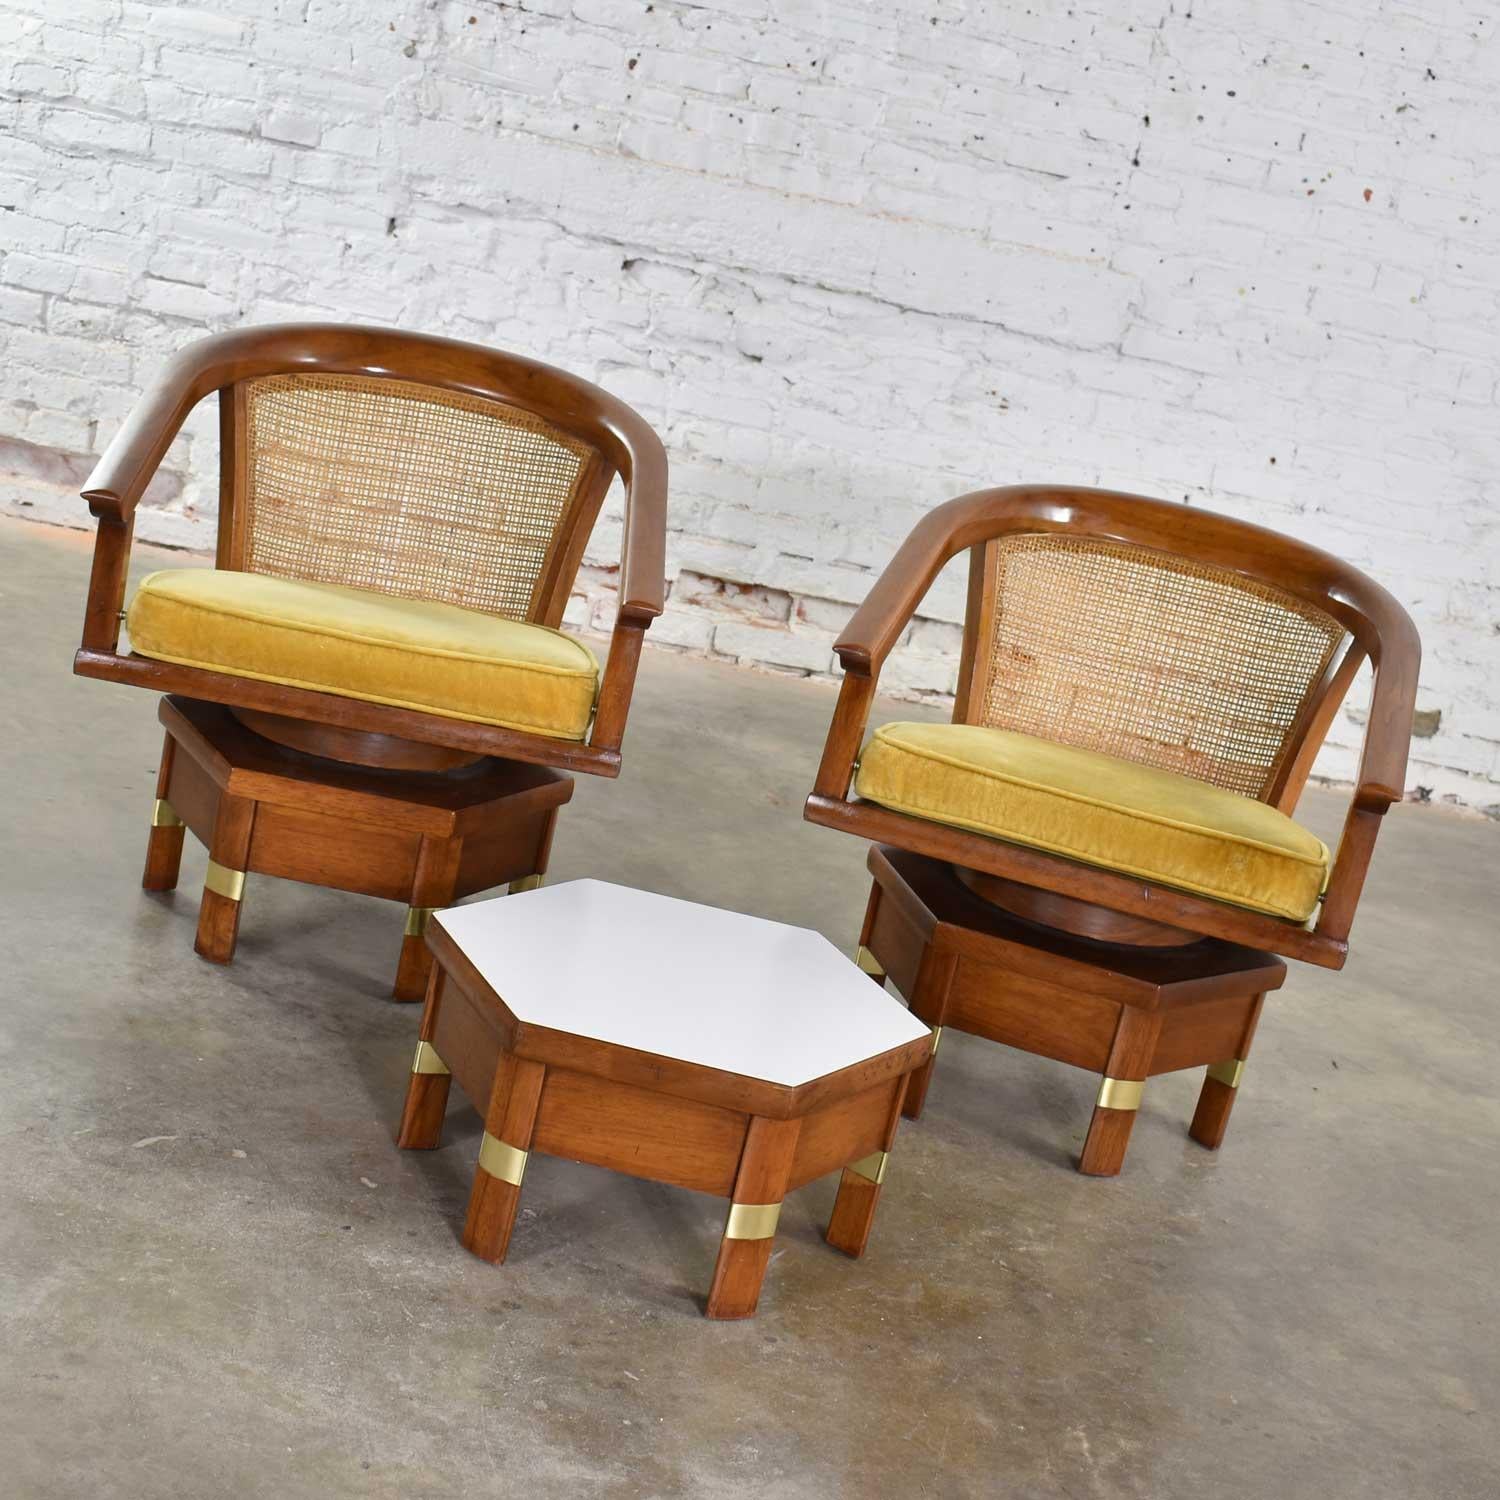 Handsome and unusual pair of campaign style swivel chairs with a cane back and loose seat cushion on a hexagon base. They are combined with a low hex table with white laminate top. All are by Hickory Furniture Manufacturing. They are in wonderful